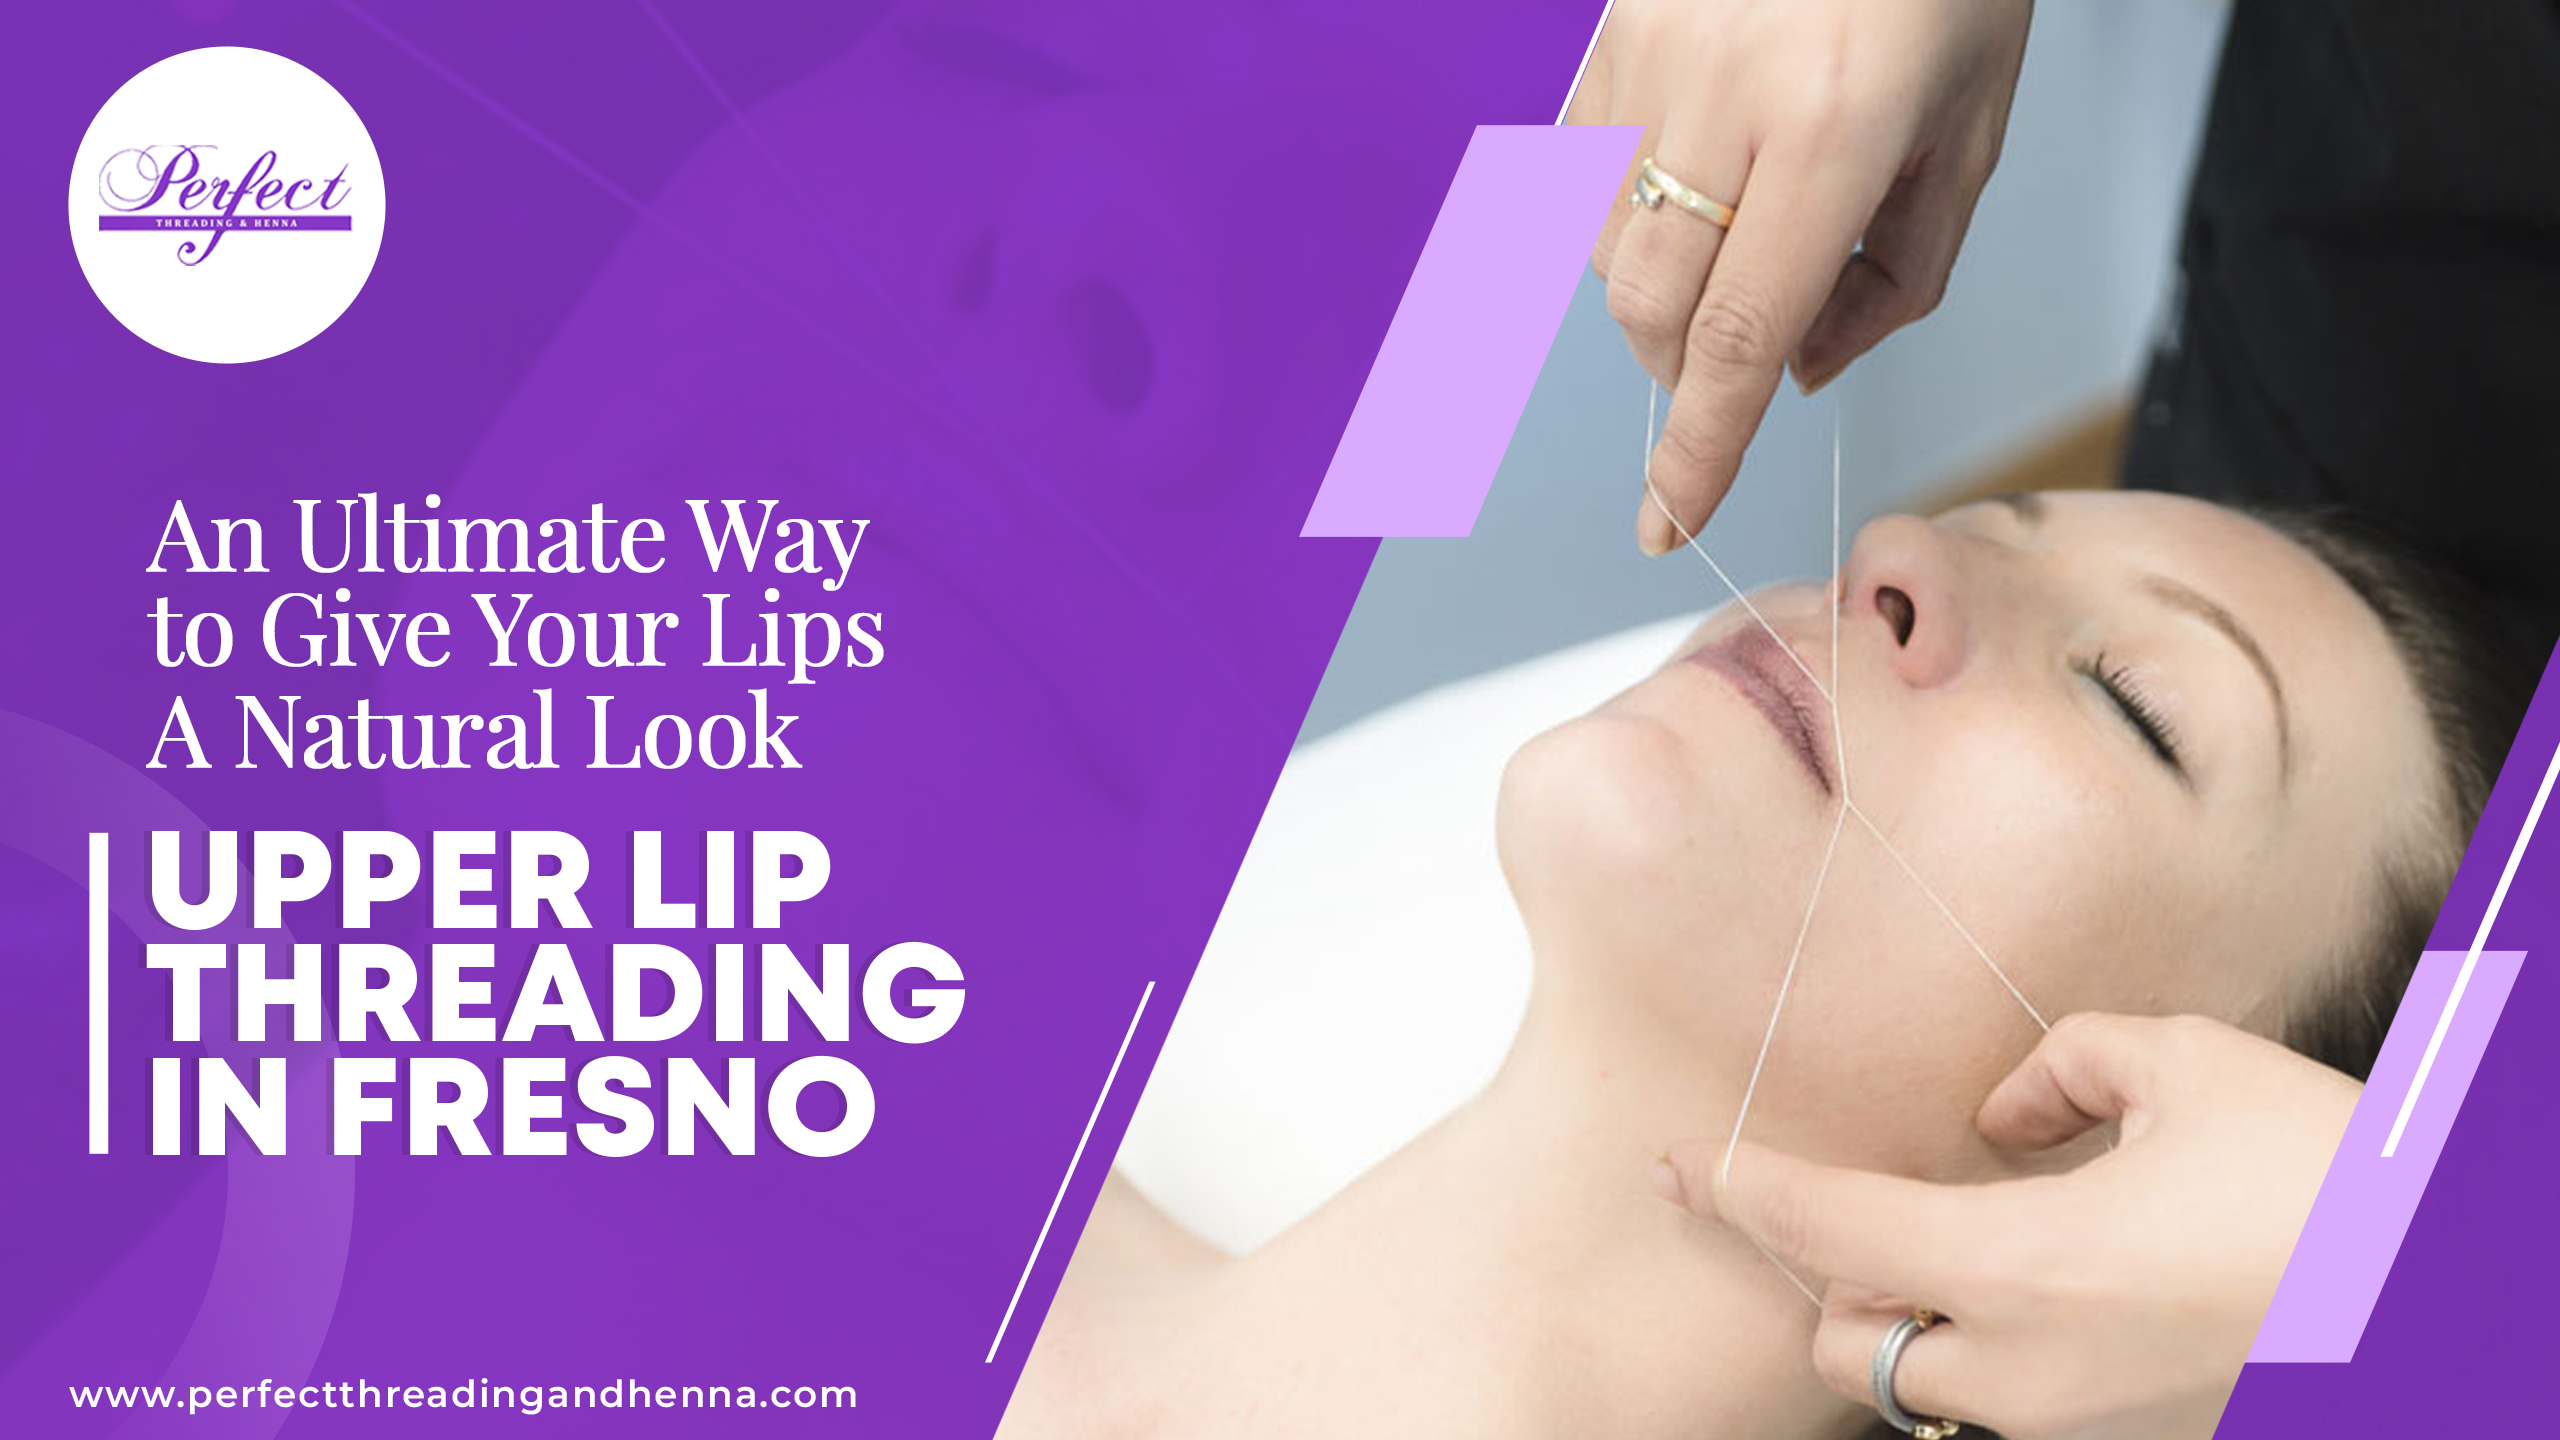 An Ultimate Way to Give Your Lips A Natural Look - Upper Lip Threading In Fresno